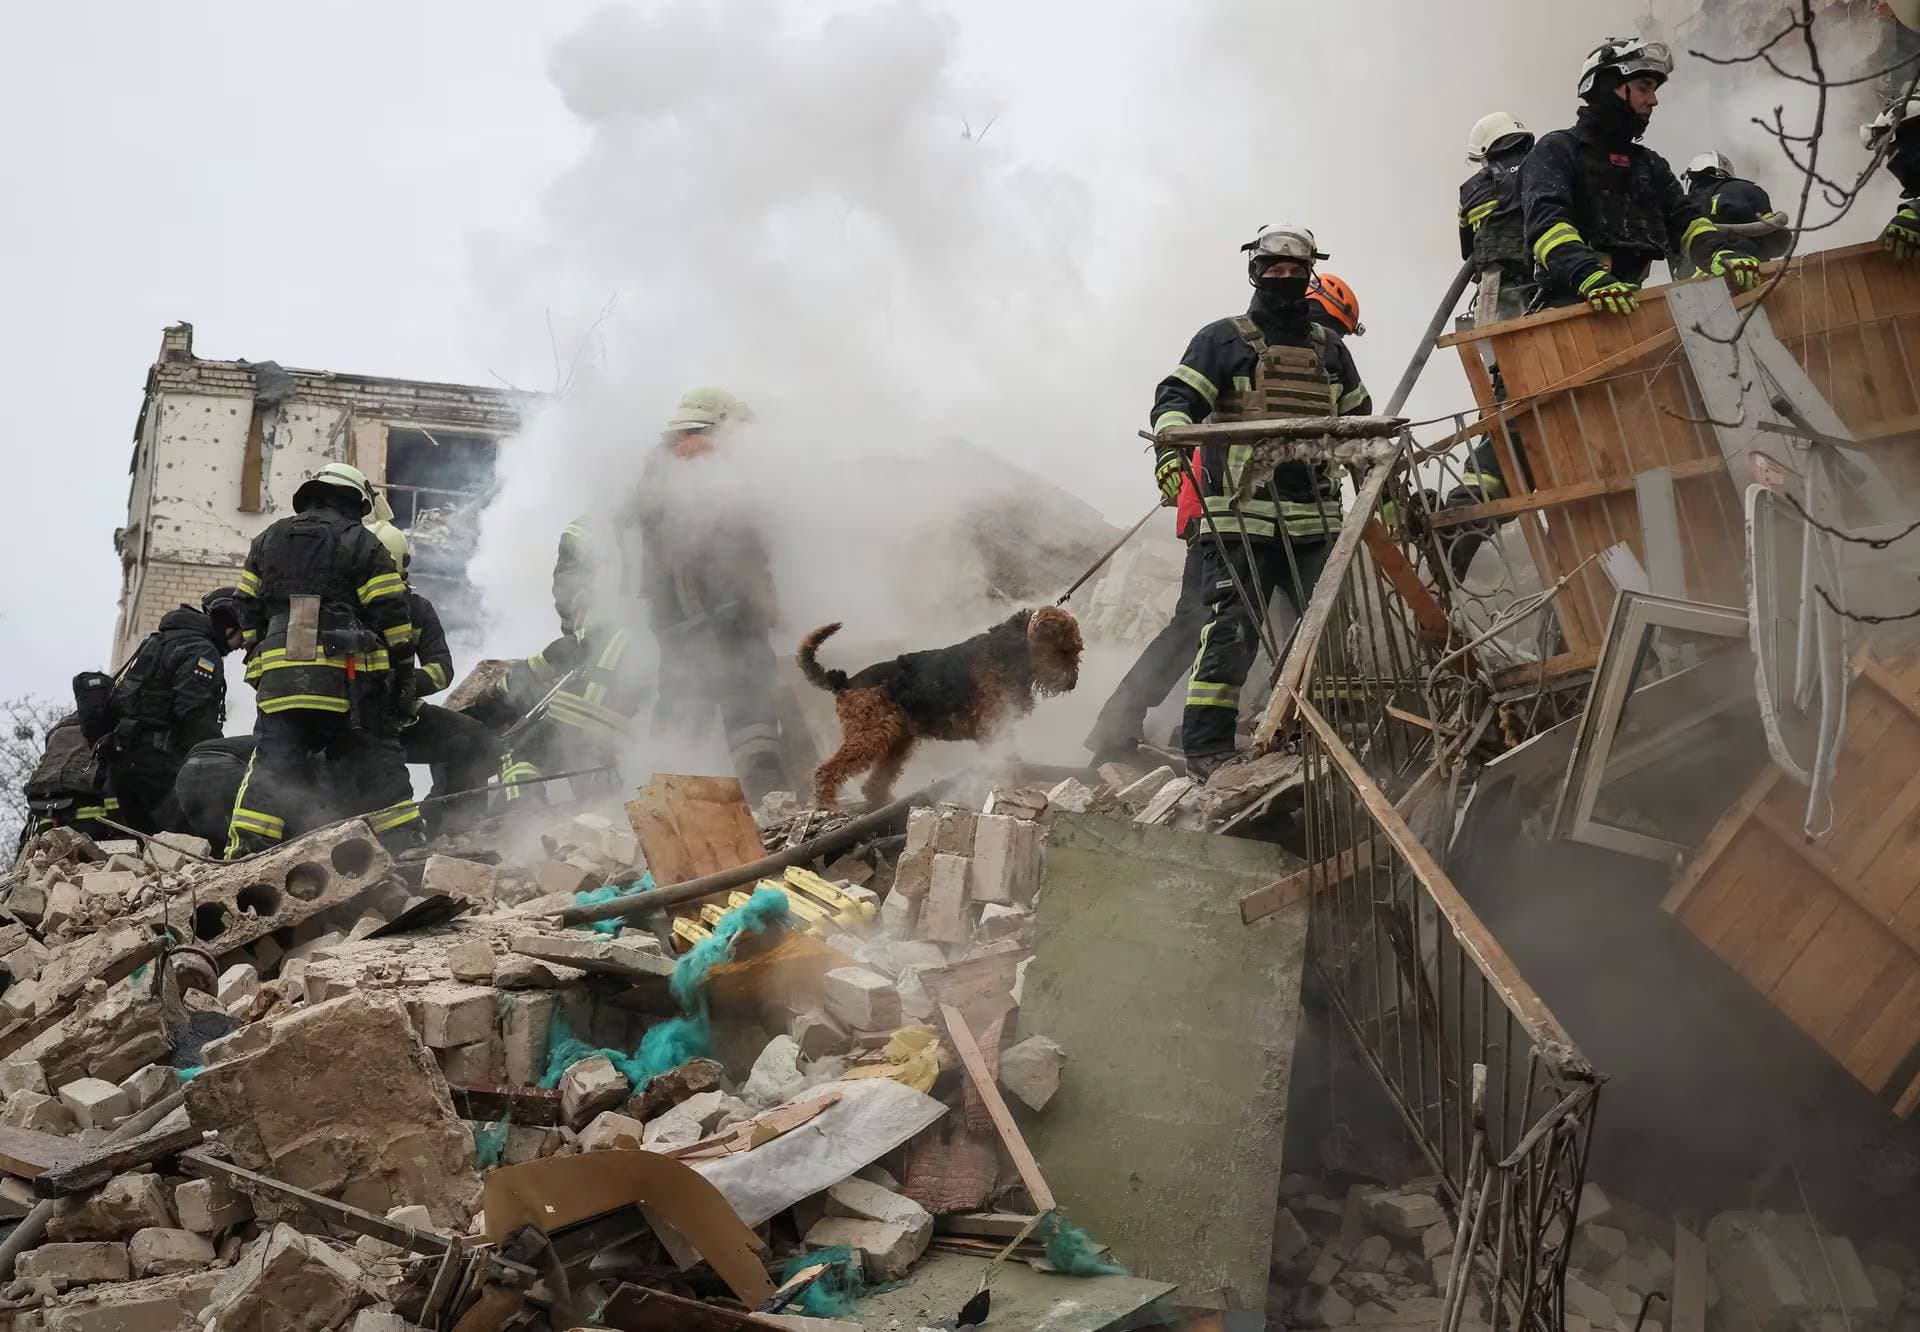 Rescuers with a dog work at a site of a residential building heavily damaged during a Russian missile attack in Kharkiv